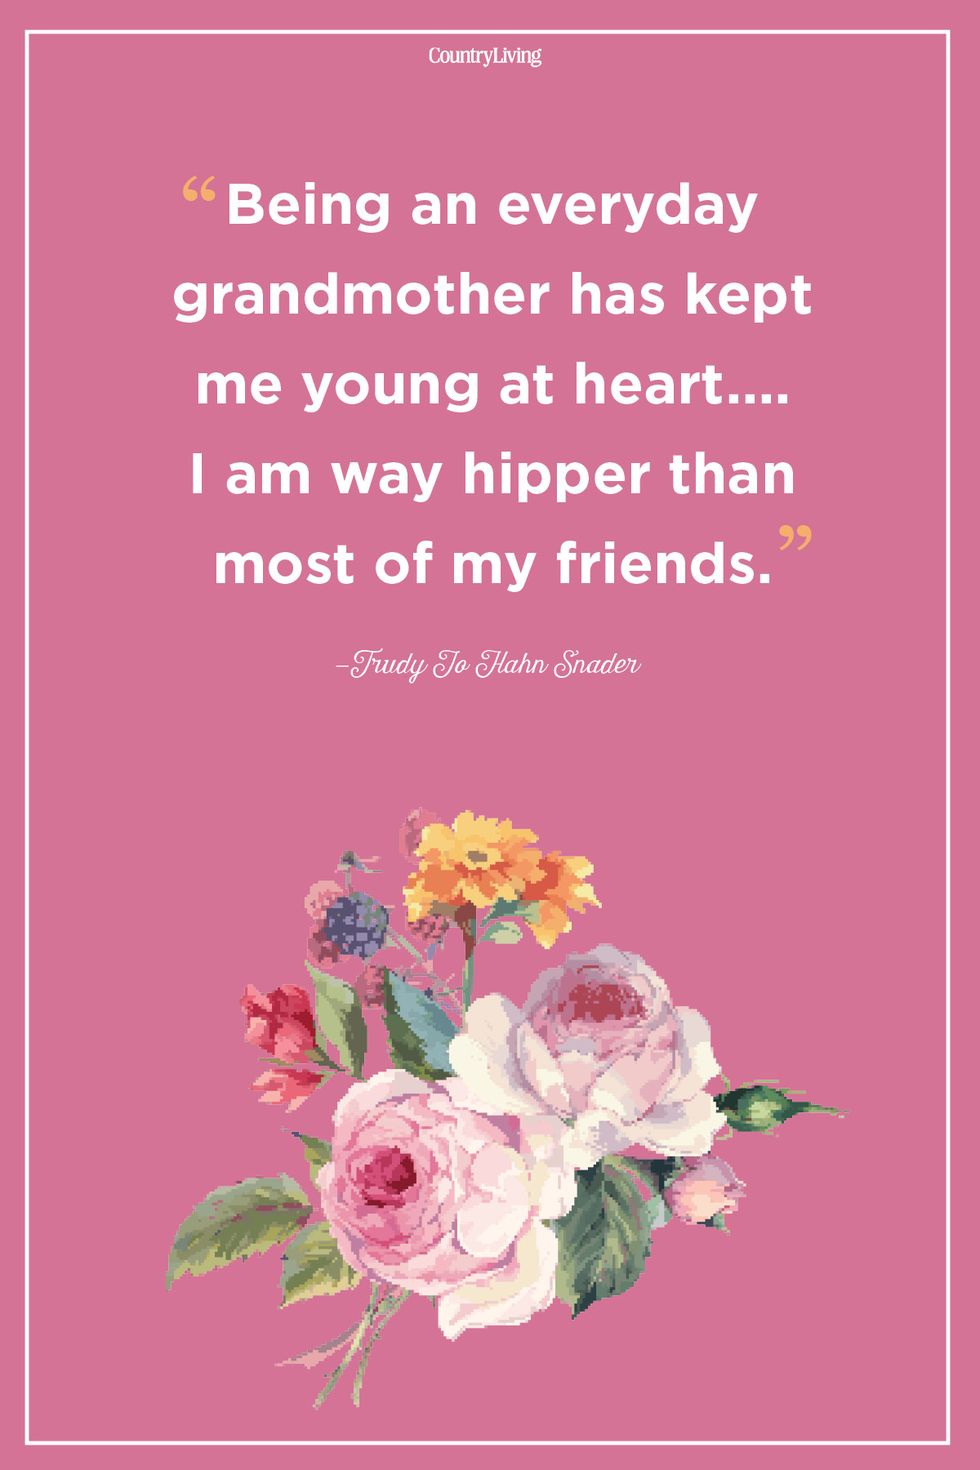 grandma quotes being an everyday grandmother